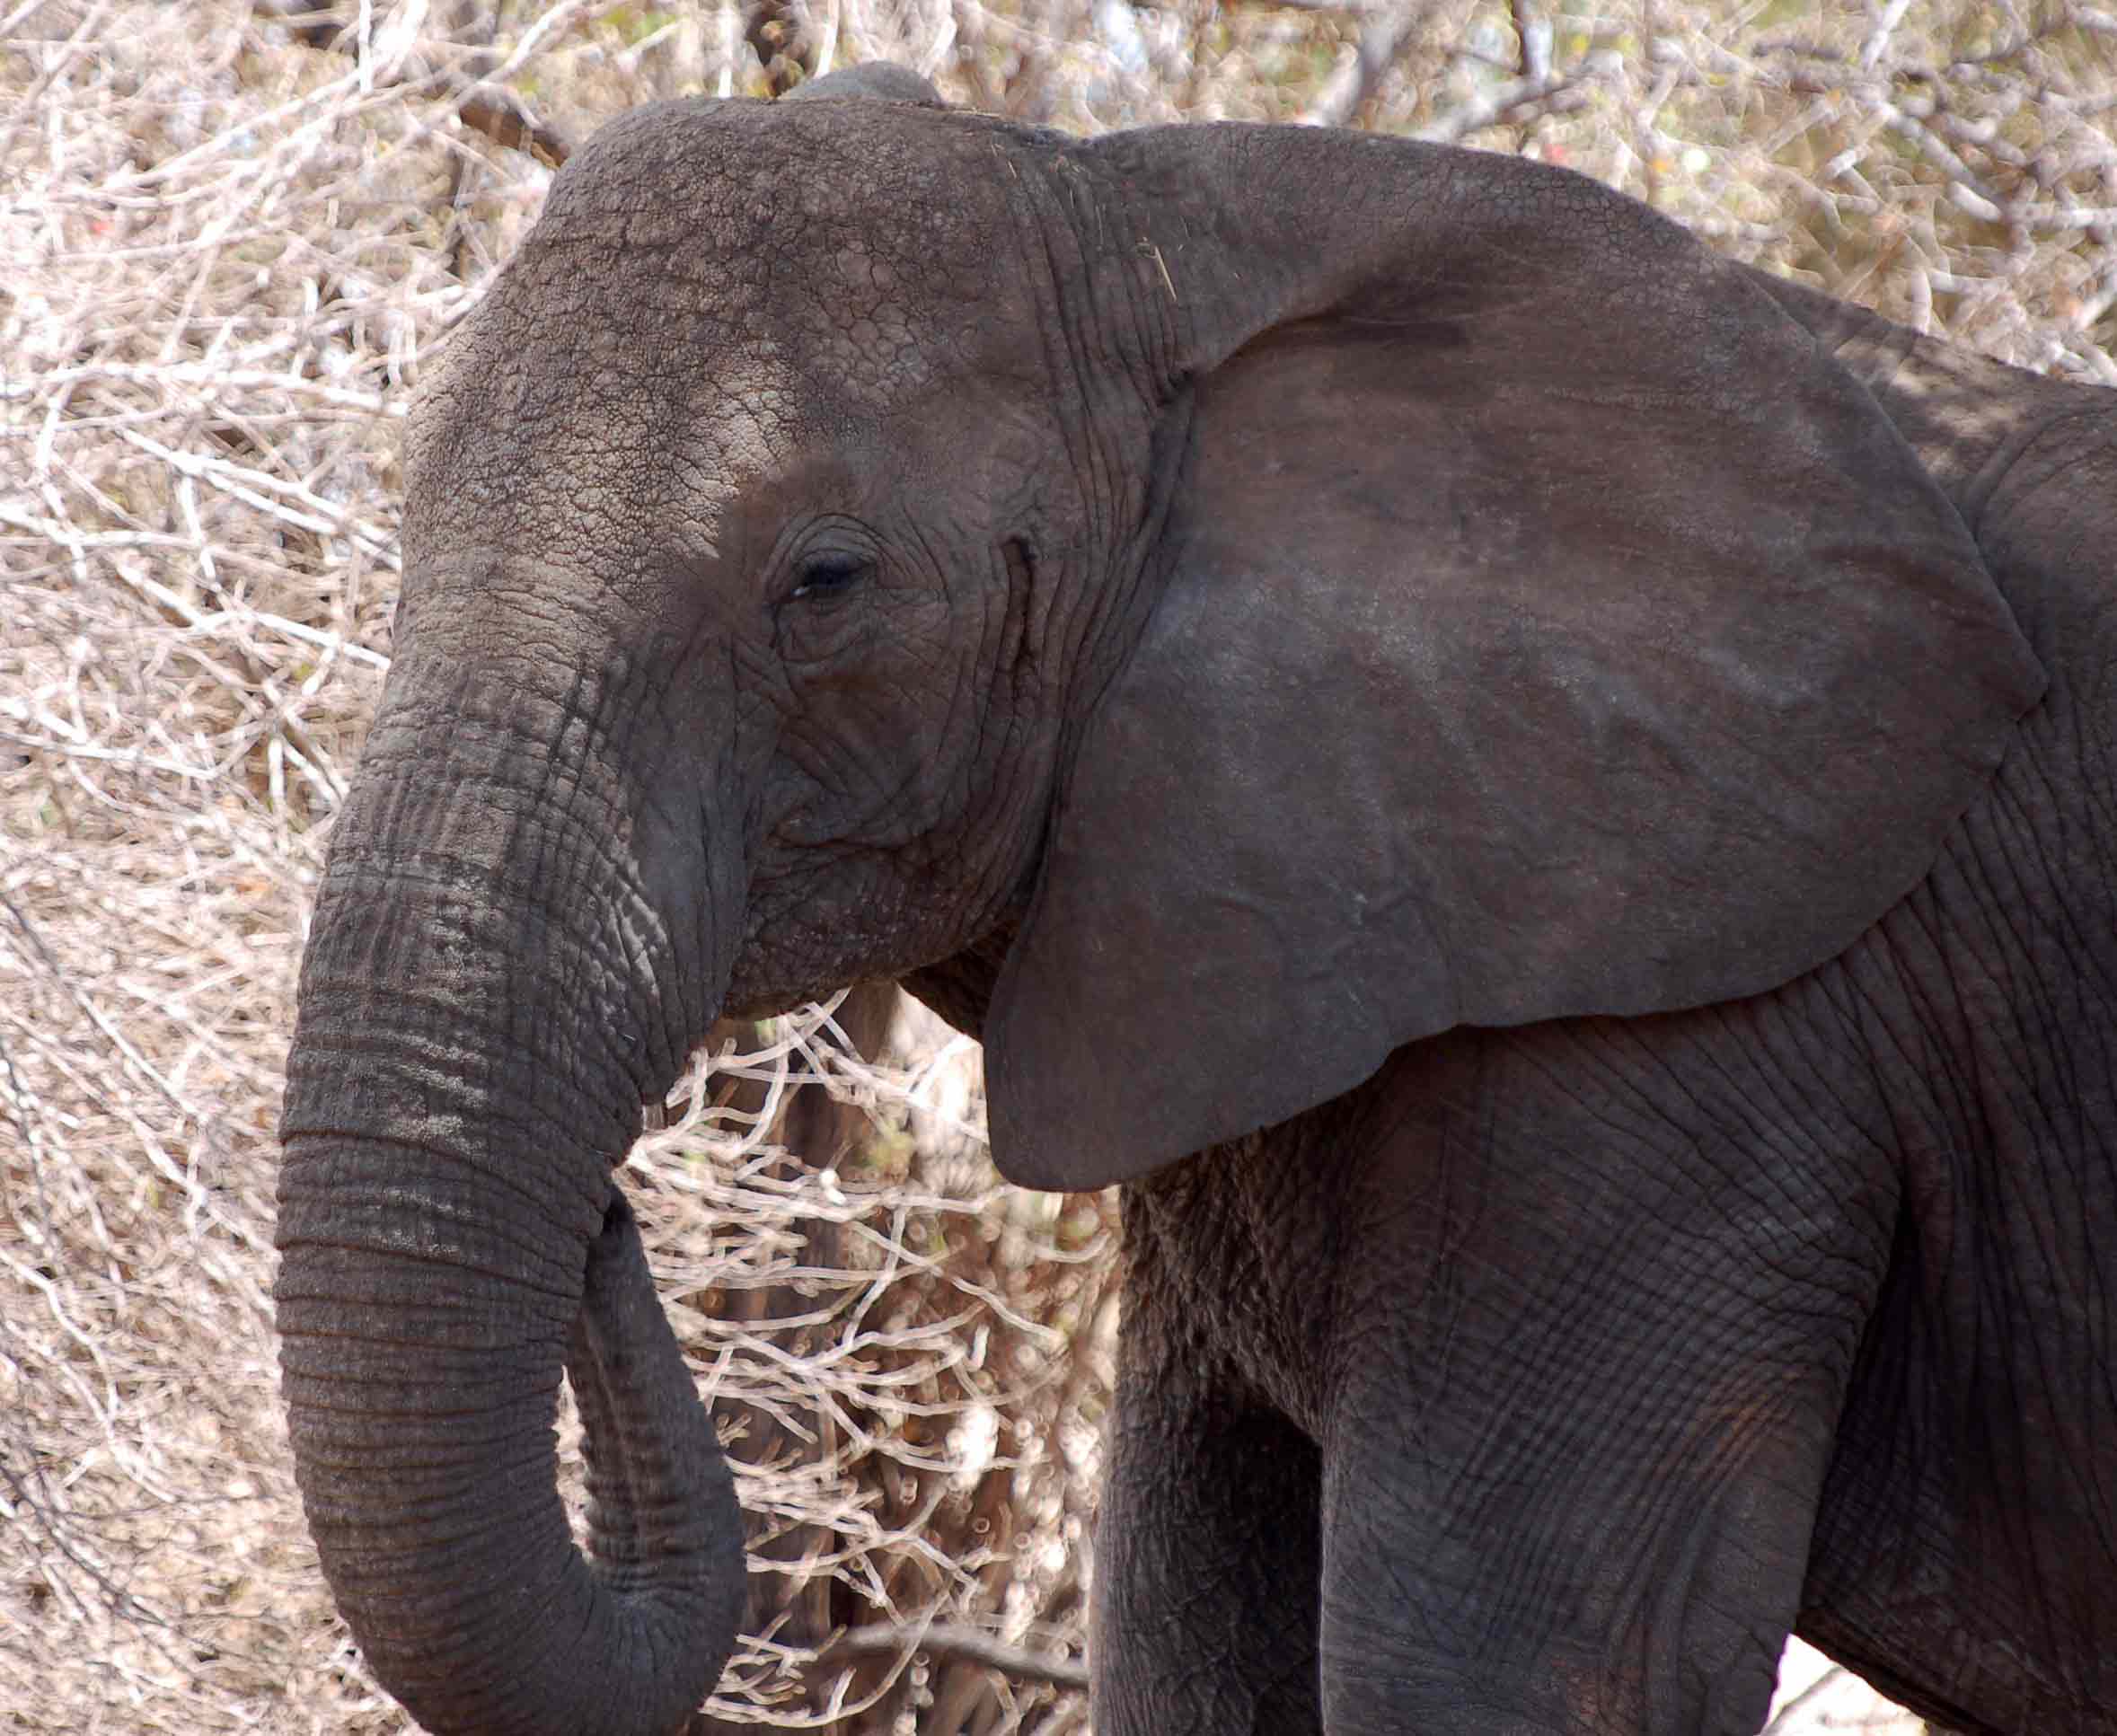 A new study shows that females could be losing their tusks as an evolutionary response to poaching